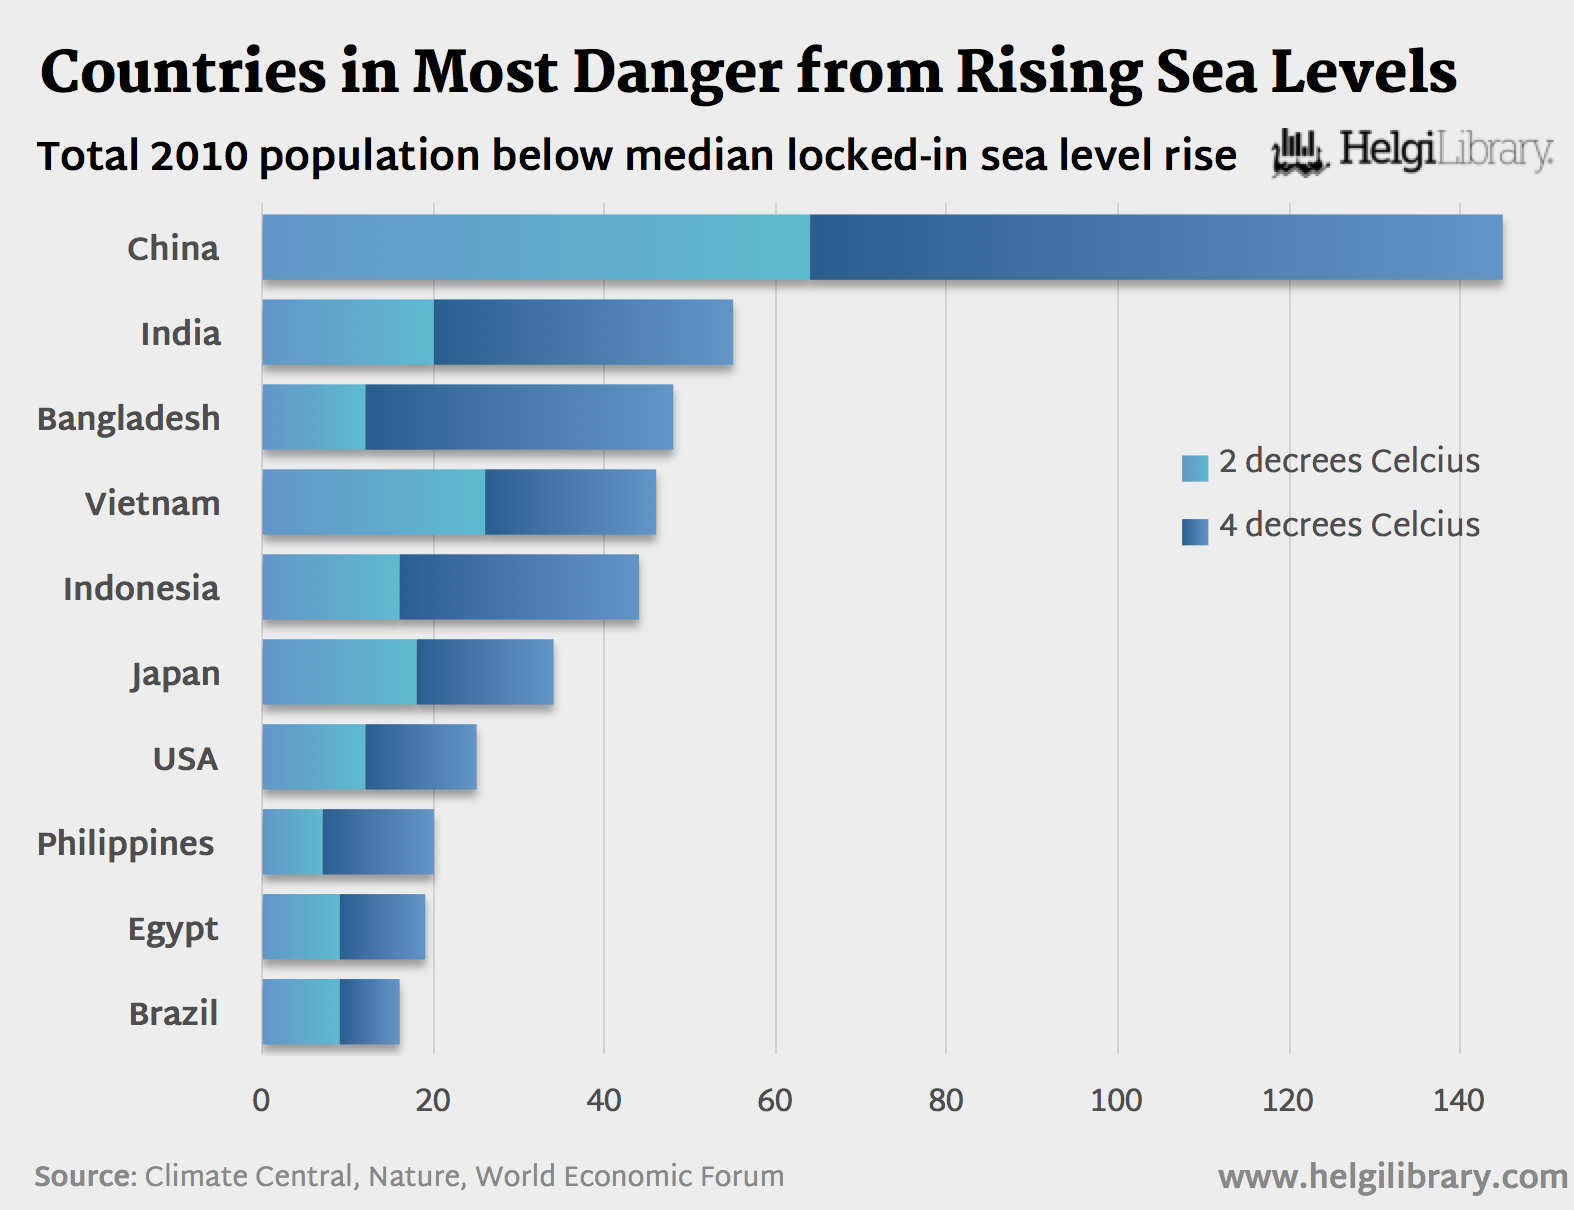 What Country is Most in Danger from Rising Sea Levels?